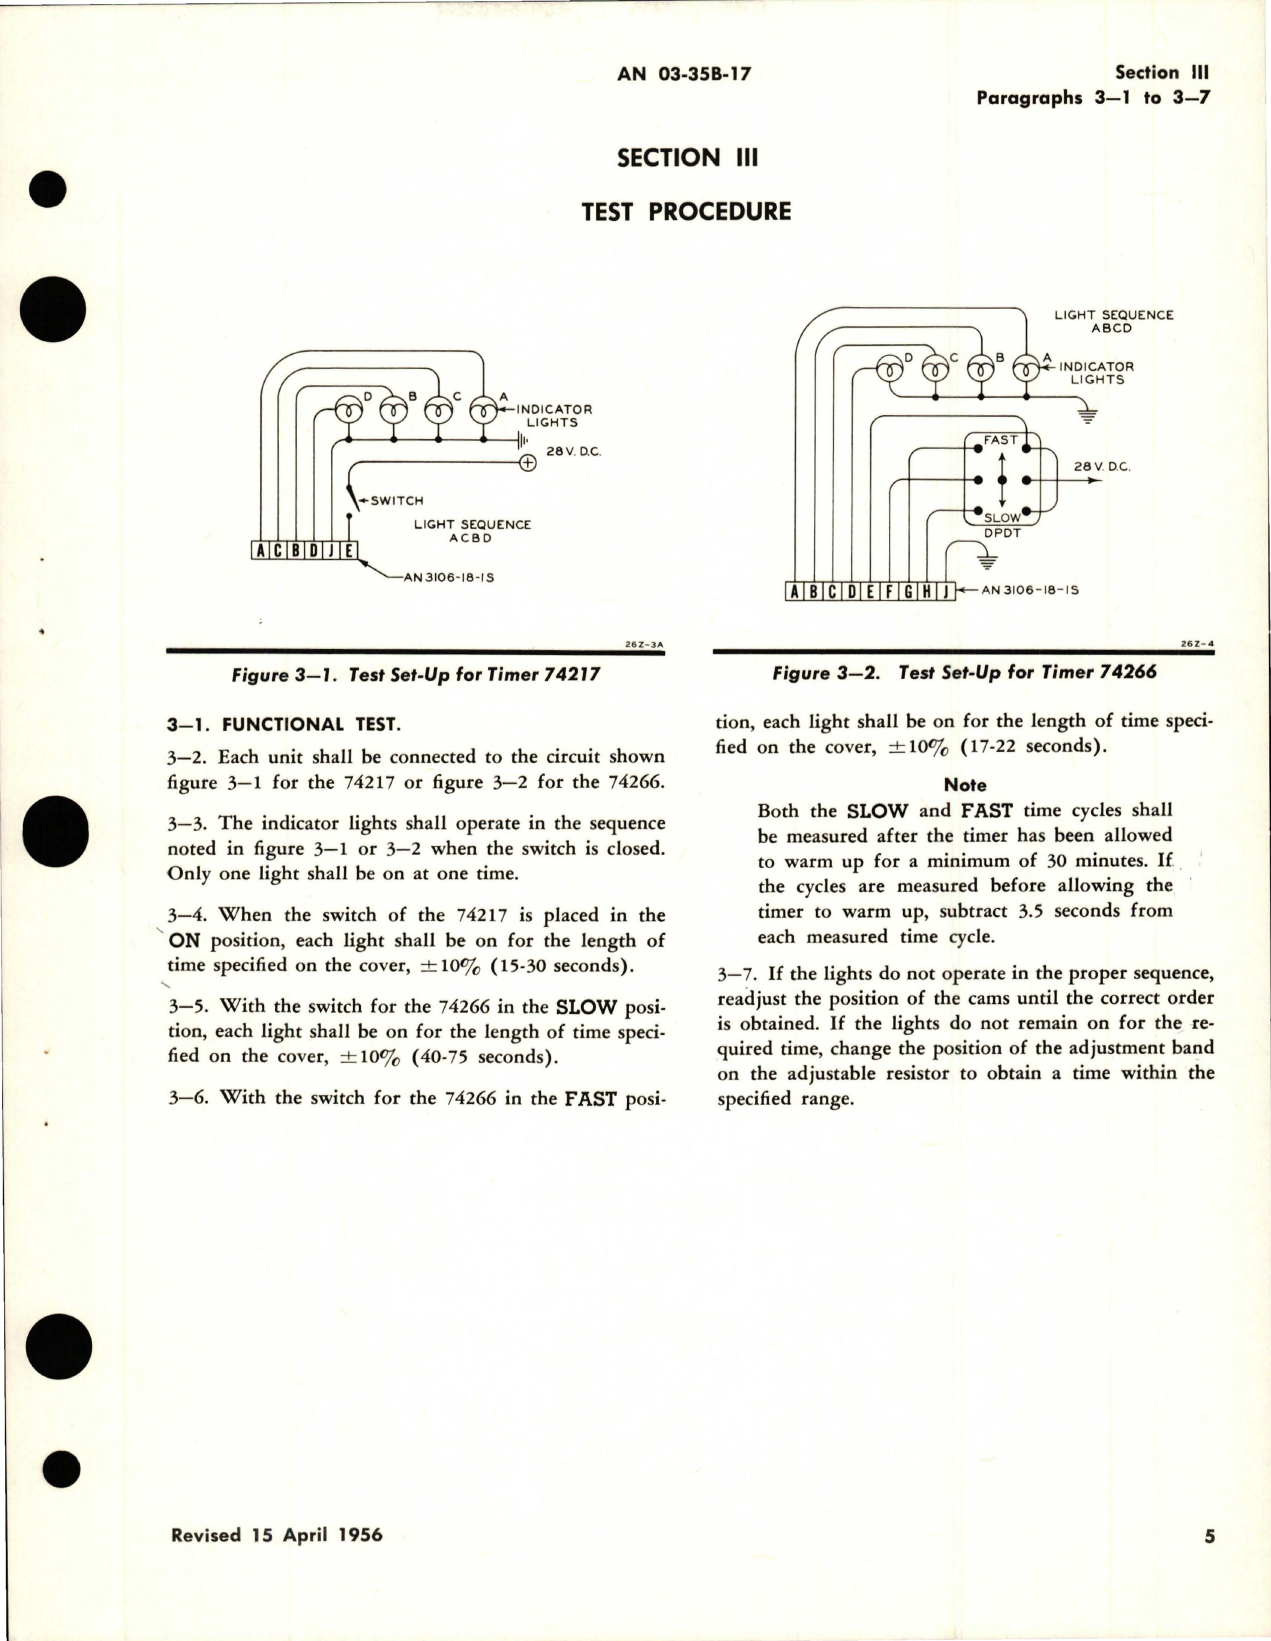 Sample page 9 from AirCorps Library document: Overhaul Instructions for De-Icer Timers - Models 74217, 74266, 556989, 556990, and 556991                                                                                                              